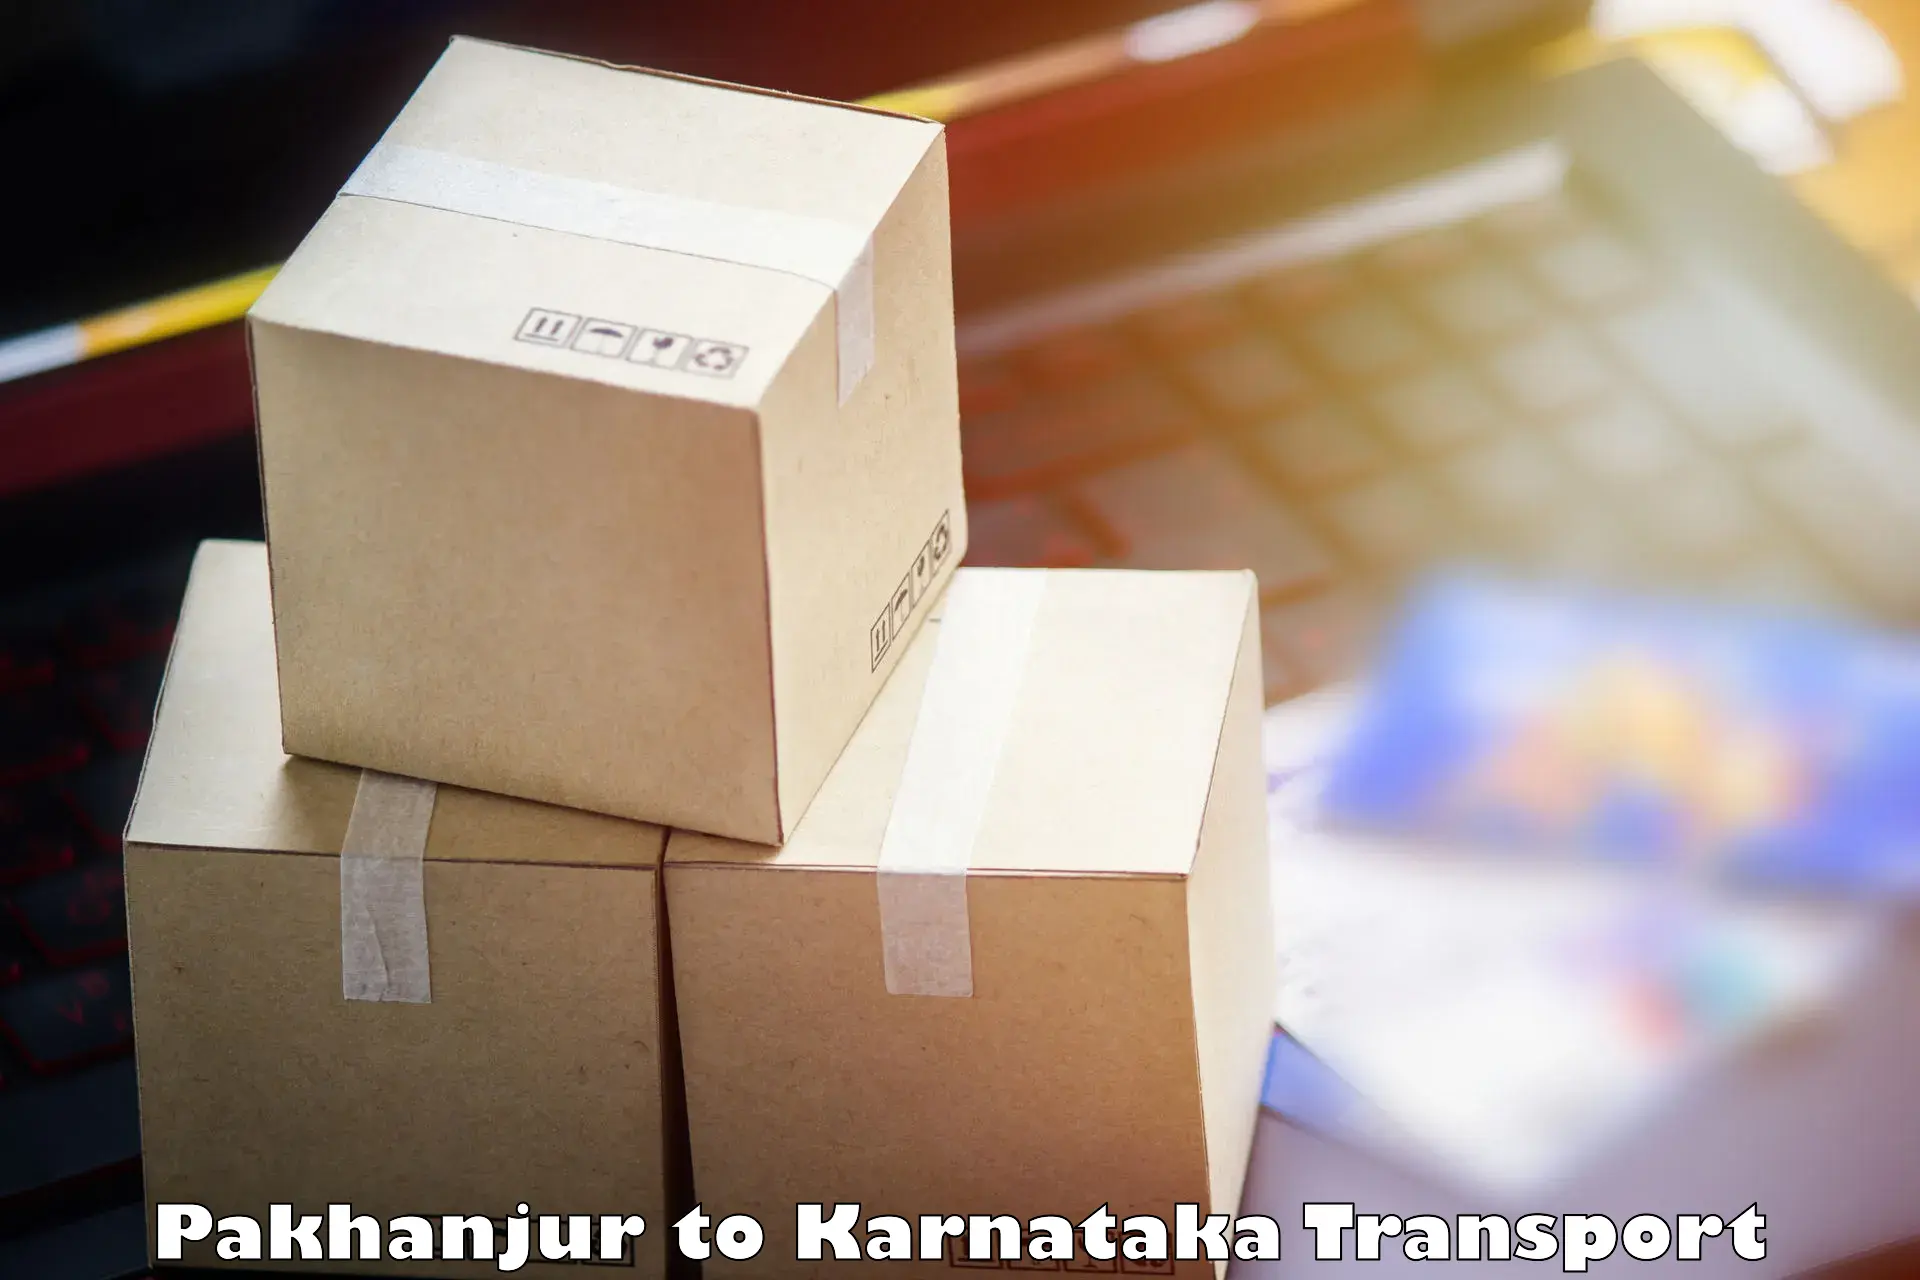 Furniture transport service in Pakhanjur to Indian Institute of Science Bangalore